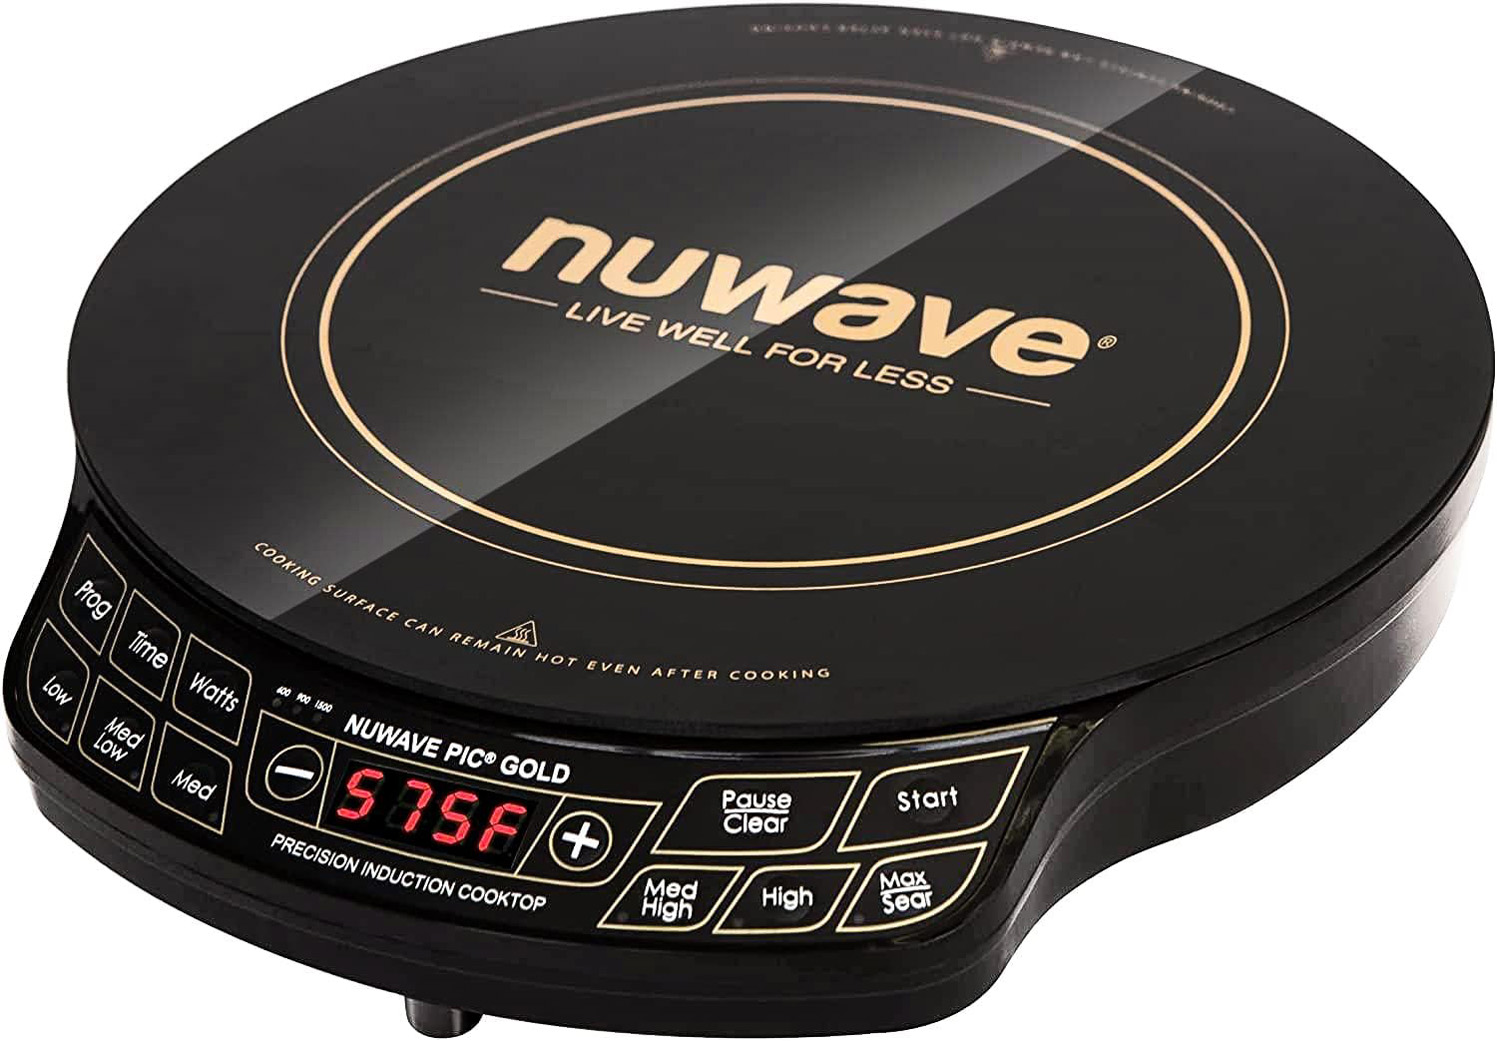 Nuwave Gold Precision Induction Cooktop, Portable, Powerful